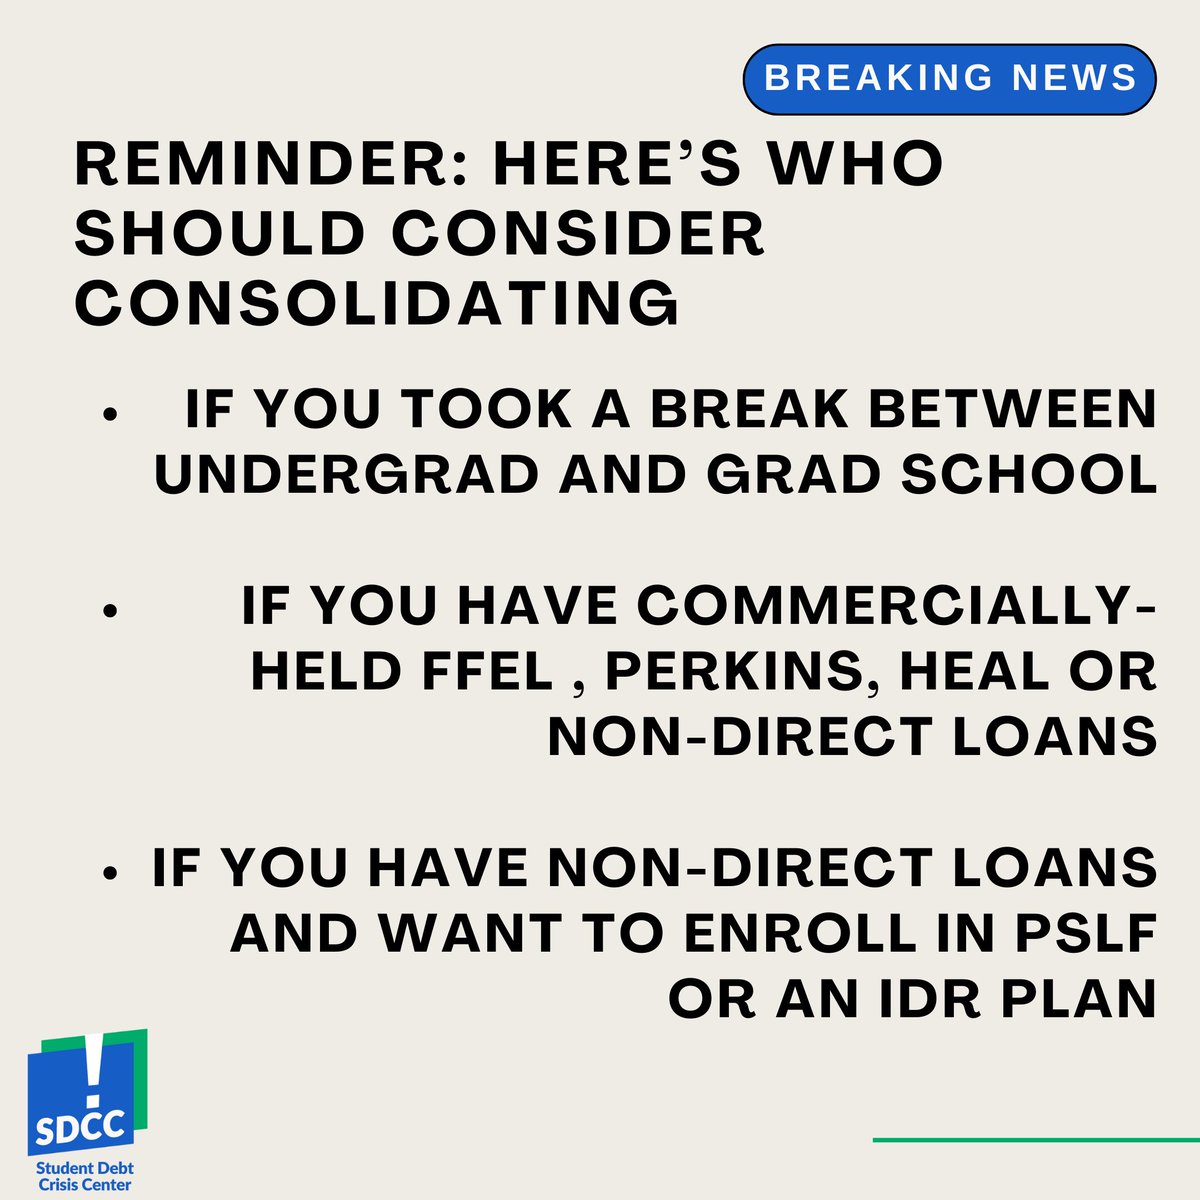 BREAKING: The consolidation deadline has been EXTENDED until June 30th, effectively allowing more borrowers to benefit from the IDR & PSLF Account Adjustment. Take a minute to see if you need to take action!